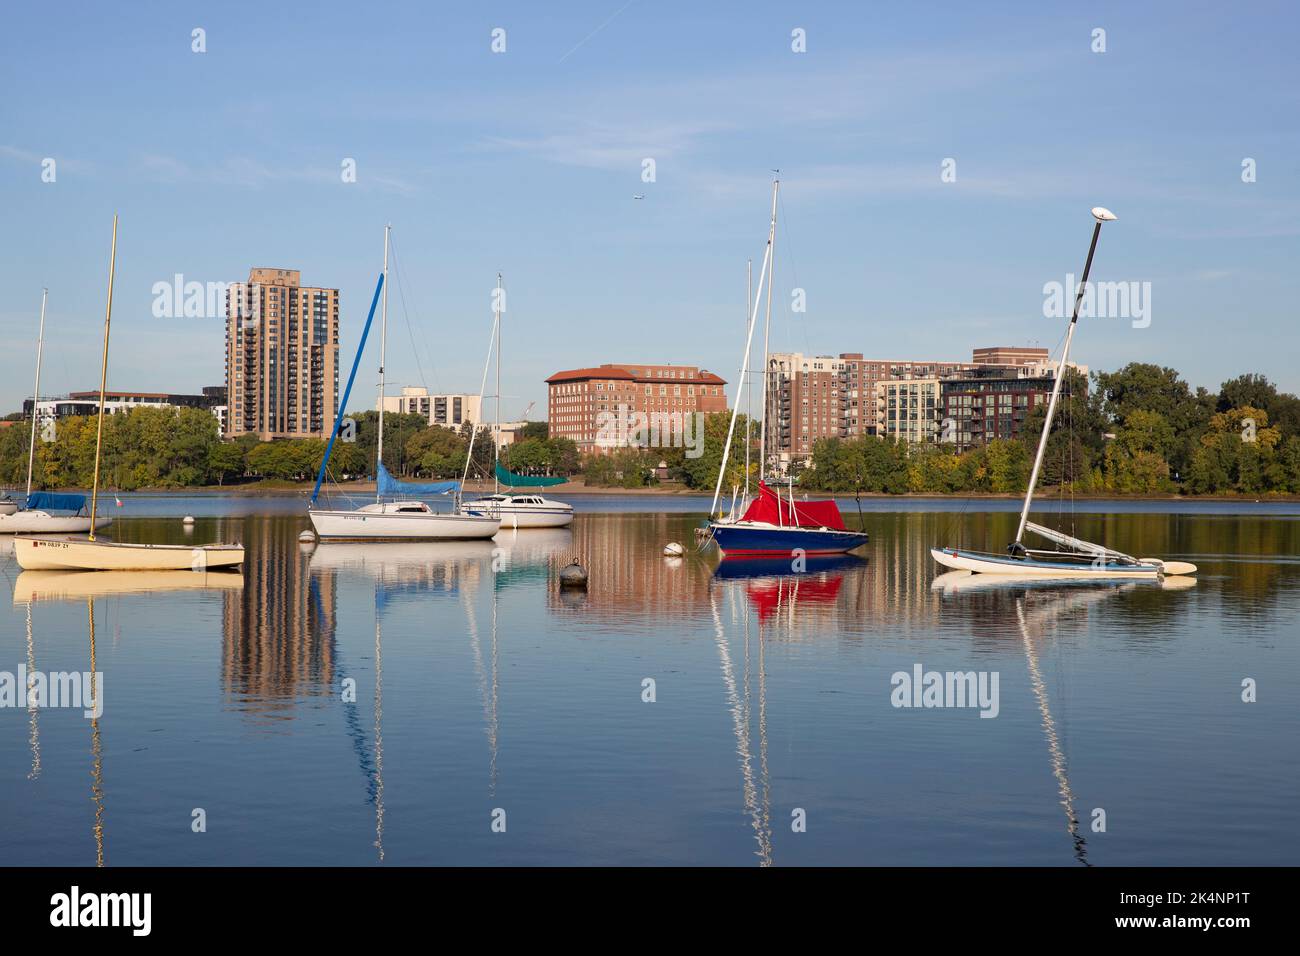 Sailboats at the Minneapolis Sailing Center marina on Lake Bde Maka Ska, Minnesota. The 1928 Beach Club Residences building is in the background. Stock Photo